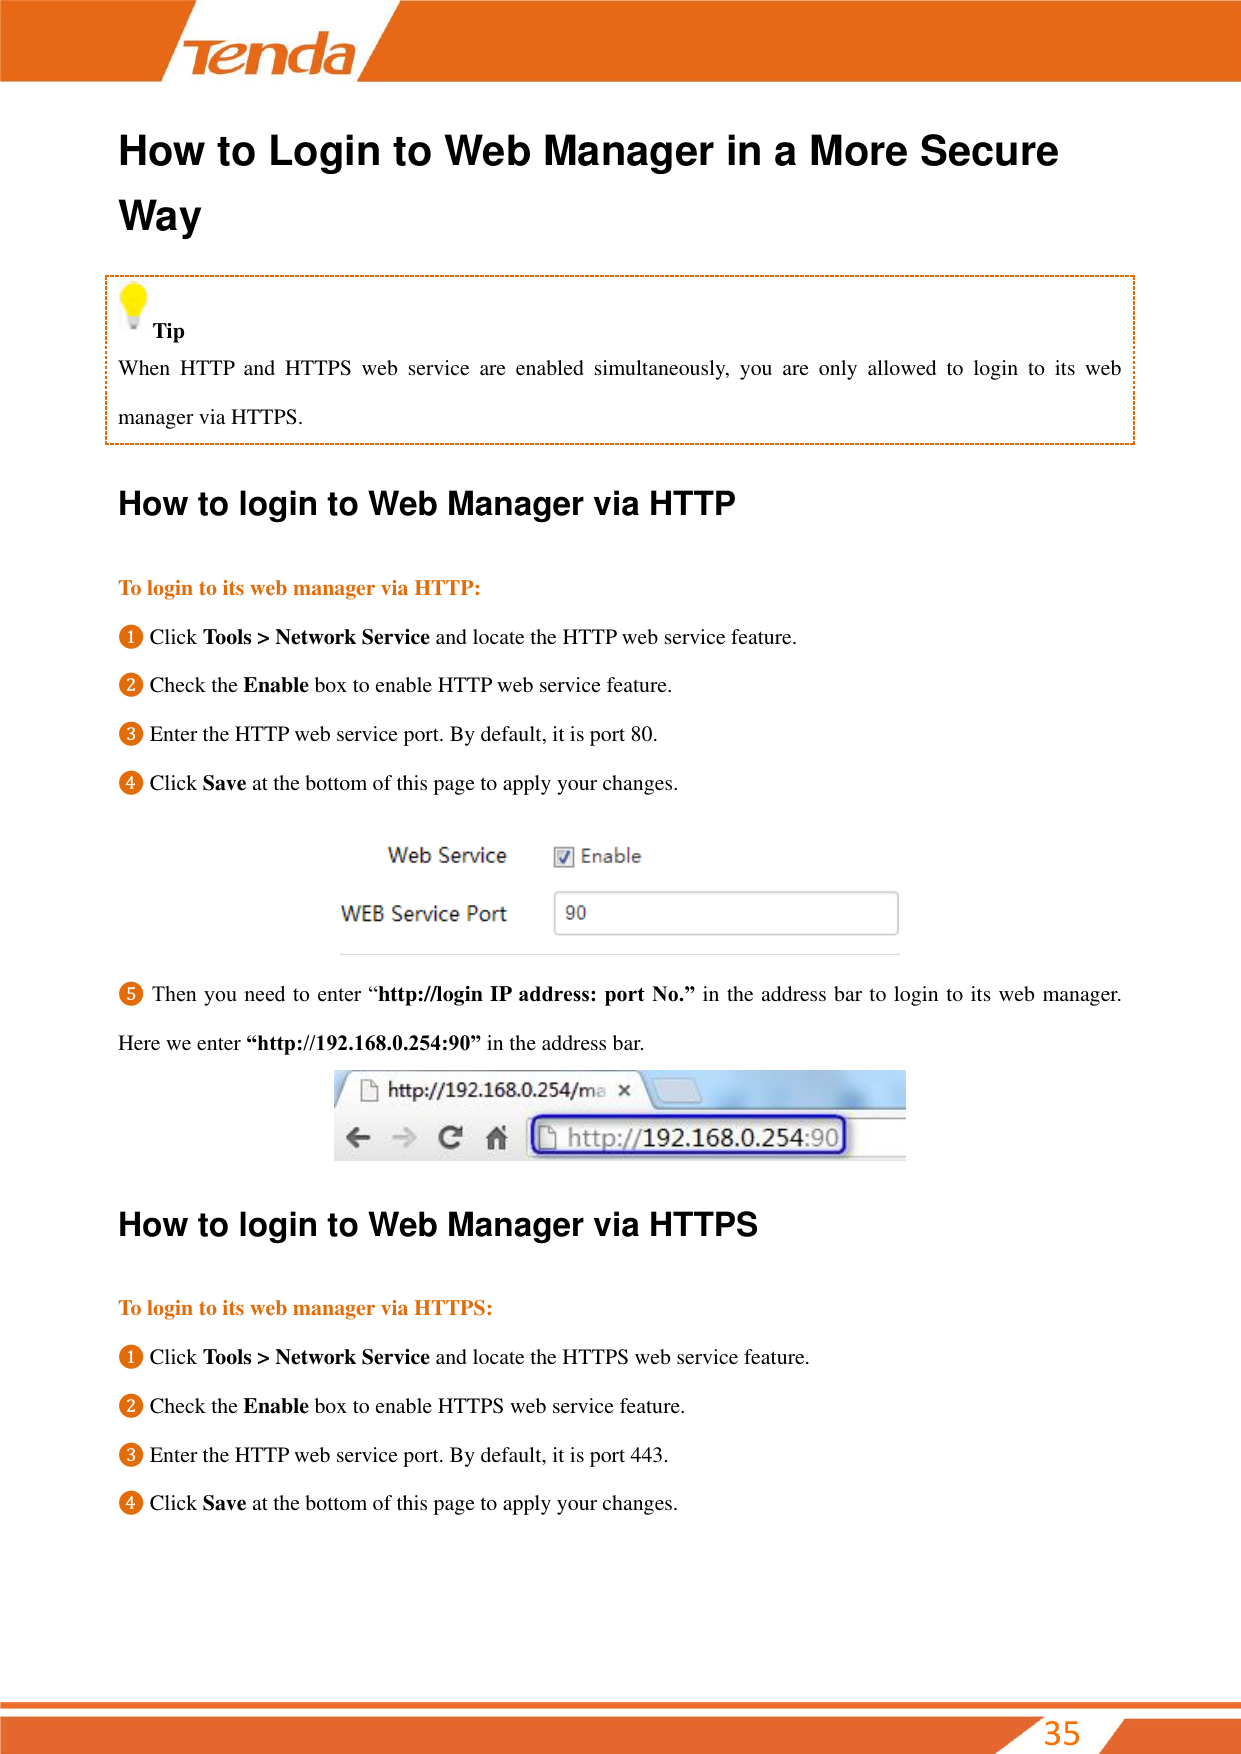         35 How to Login to Web Manager in a More Secure Way Tip When  HTTP  and  HTTPS  web  service  are  enabled  simultaneously,  you  are  only  allowed  to  login  to  its  web manager via HTTPS. How to login to Web Manager via HTTP To login to its web manager via HTTP: ❶ Click Tools &gt; Network Service and locate the HTTP web service feature. ❷ Check the Enable box to enable HTTP web service feature. ❸ Enter the HTTP web service port. By default, it is port 80. ❹ Click Save at the bottom of this page to apply your changes.  ❺ Then you need to enter “http://login IP address: port No.” in the address bar to login to its web manager. Here we enter “http://192.168.0.254:90” in the address bar.  How to login to Web Manager via HTTPS To login to its web manager via HTTPS: ❶ Click Tools &gt; Network Service and locate the HTTPS web service feature. ❷ Check the Enable box to enable HTTPS web service feature. ❸ Enter the HTTP web service port. By default, it is port 443. ❹ Click Save at the bottom of this page to apply your changes. 